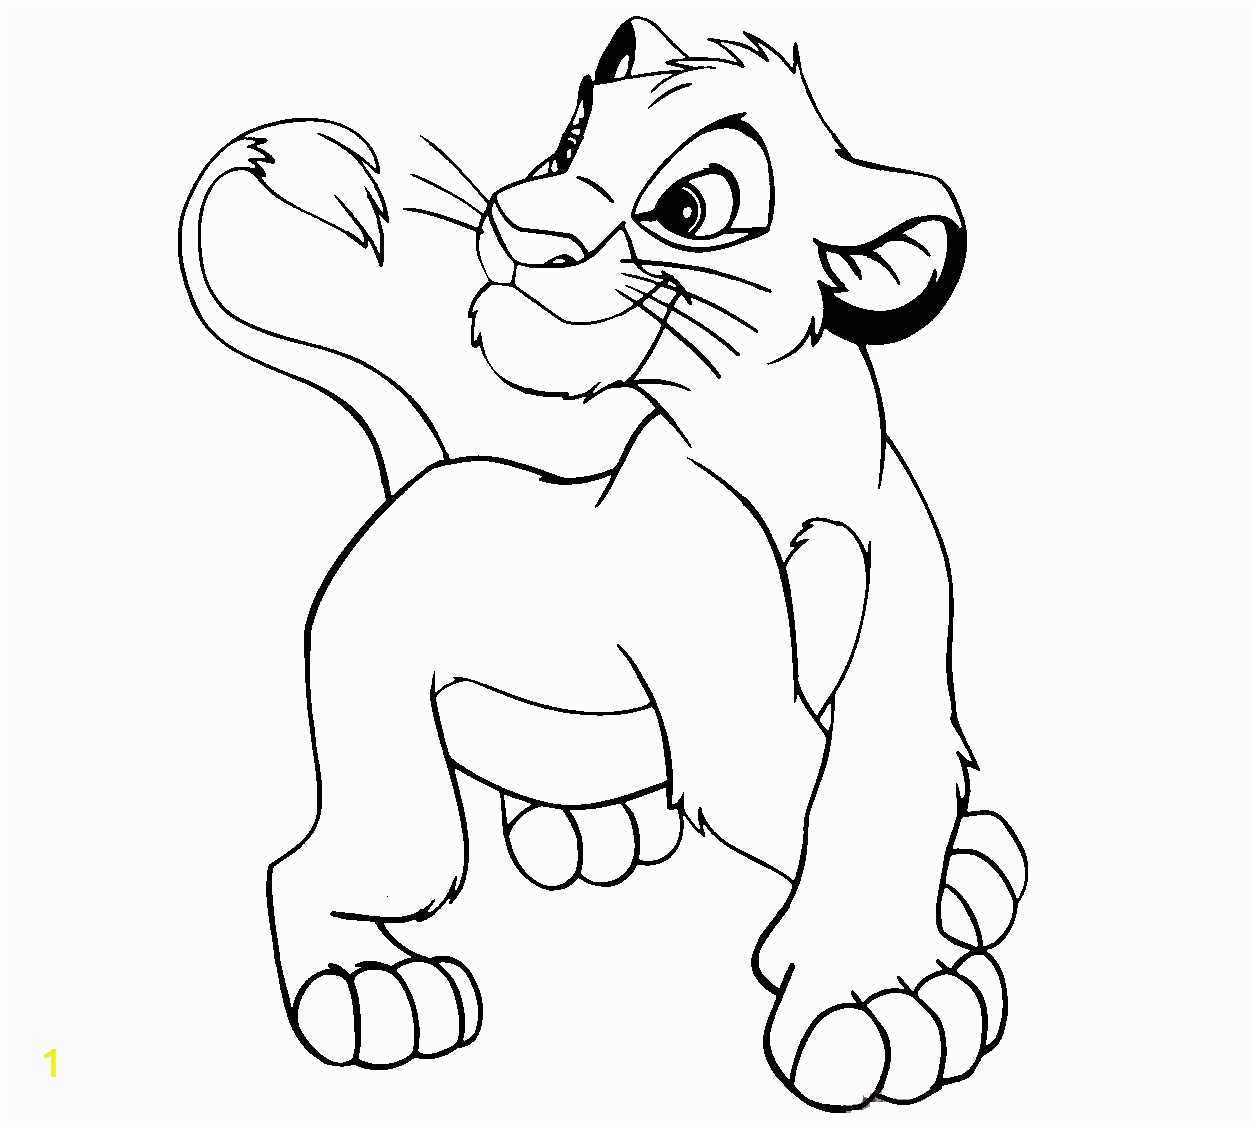 Lion King Free Printable Coloring Pages Disney Cartoon the Lion King for Kid Coloring Drawing Free